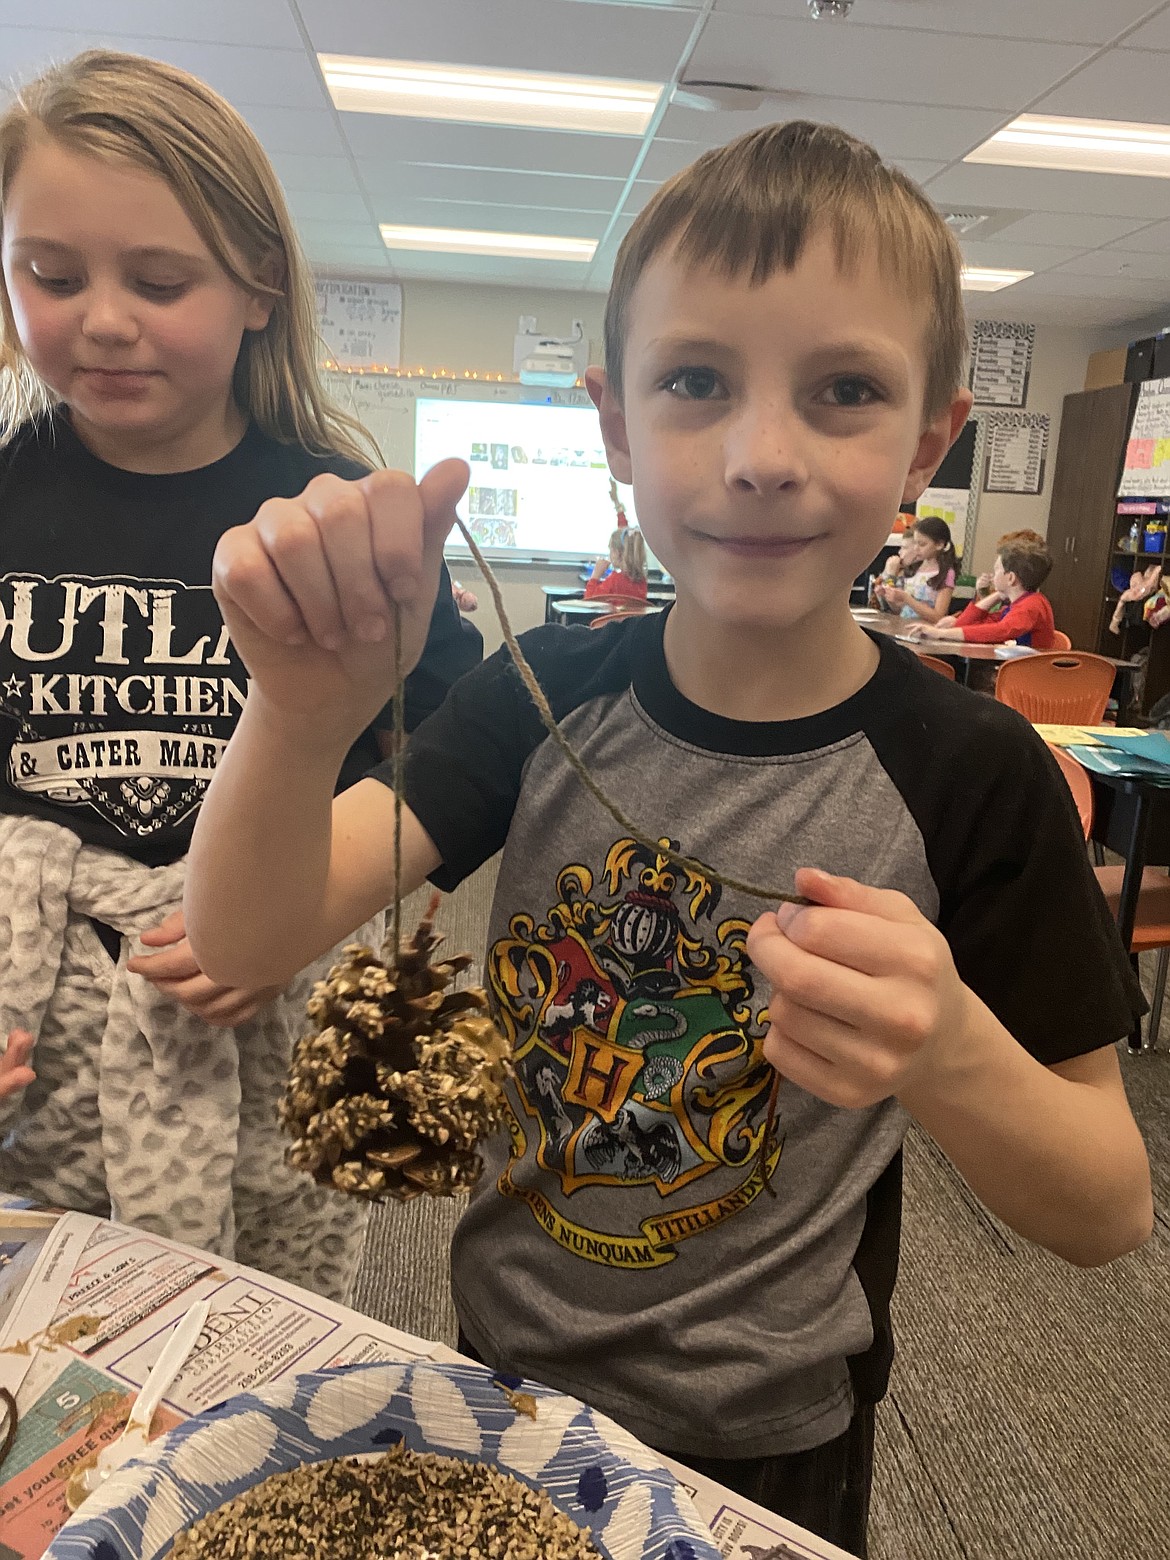 Fellow bird-lovers Annabella Hoye, 9, and Jacob Fritz, 8, enthusiastically slather sunflower butter and copious quantities of bird-seed on their bird-feeder ornaments Friday at Treaty Rock Elementary School.